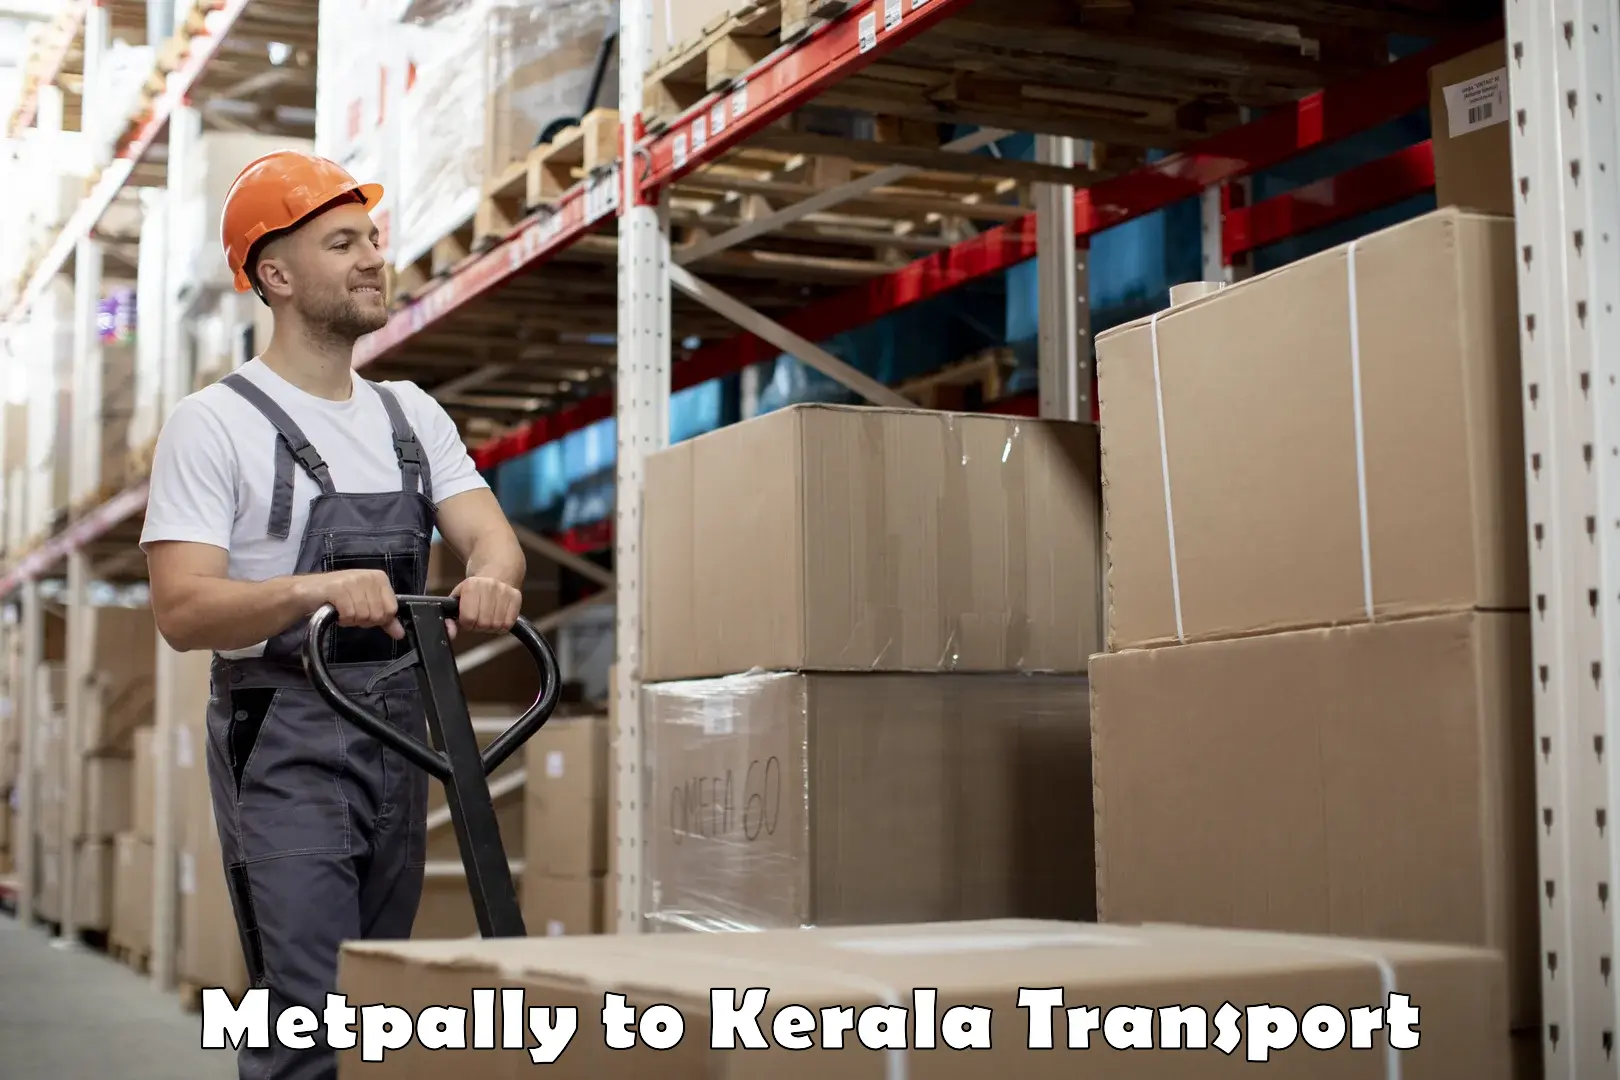 Road transport online services Metpally to Nallepilly